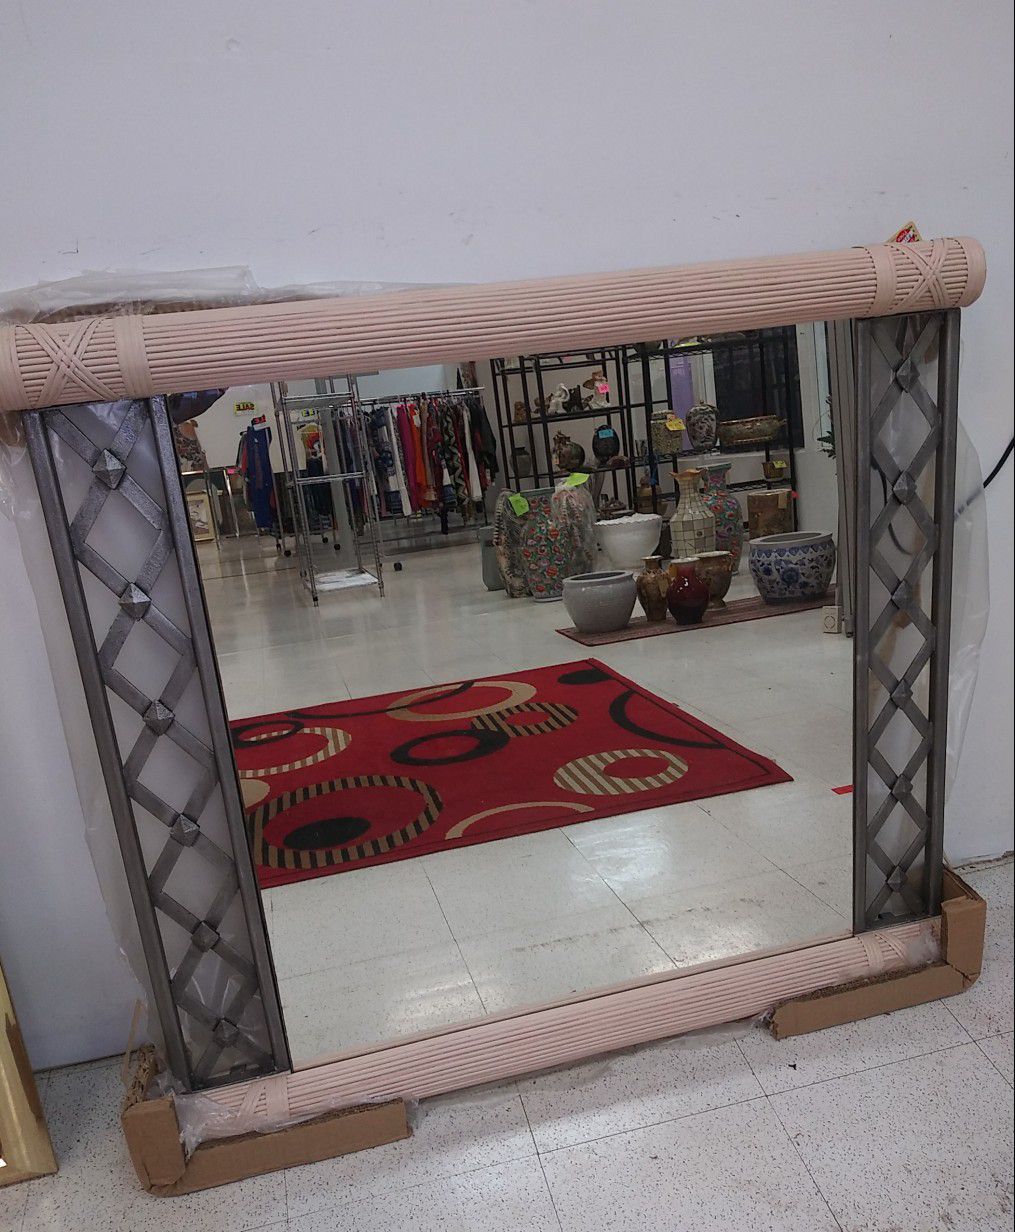 $60.00 Wall Mirror , CLEARANCE SALES, Store CLOSING Soon, purchase & Pickup @ STORE